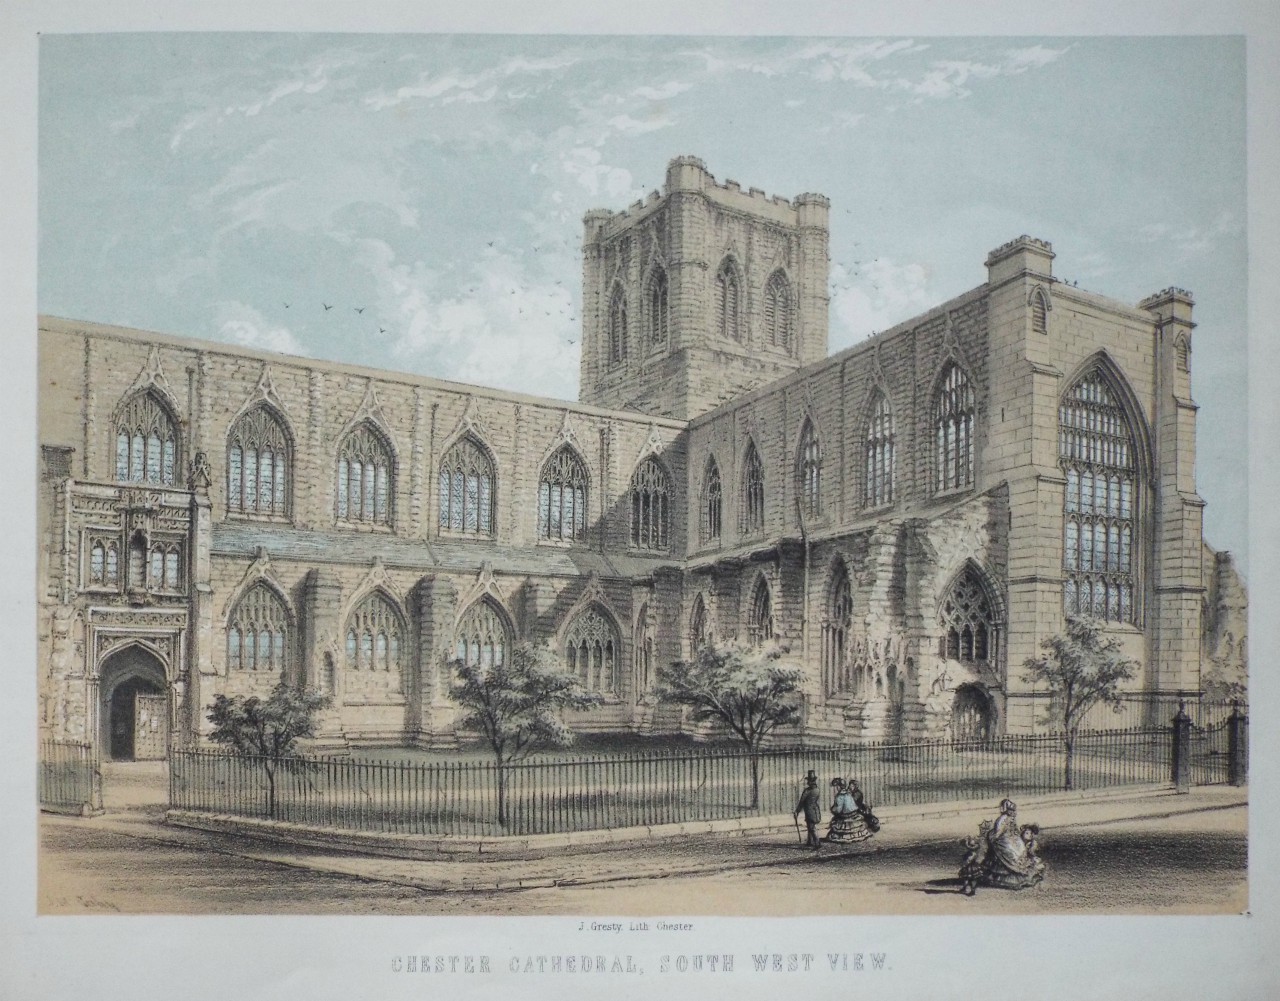 Lithograph - Chester Cathedral, South West View.